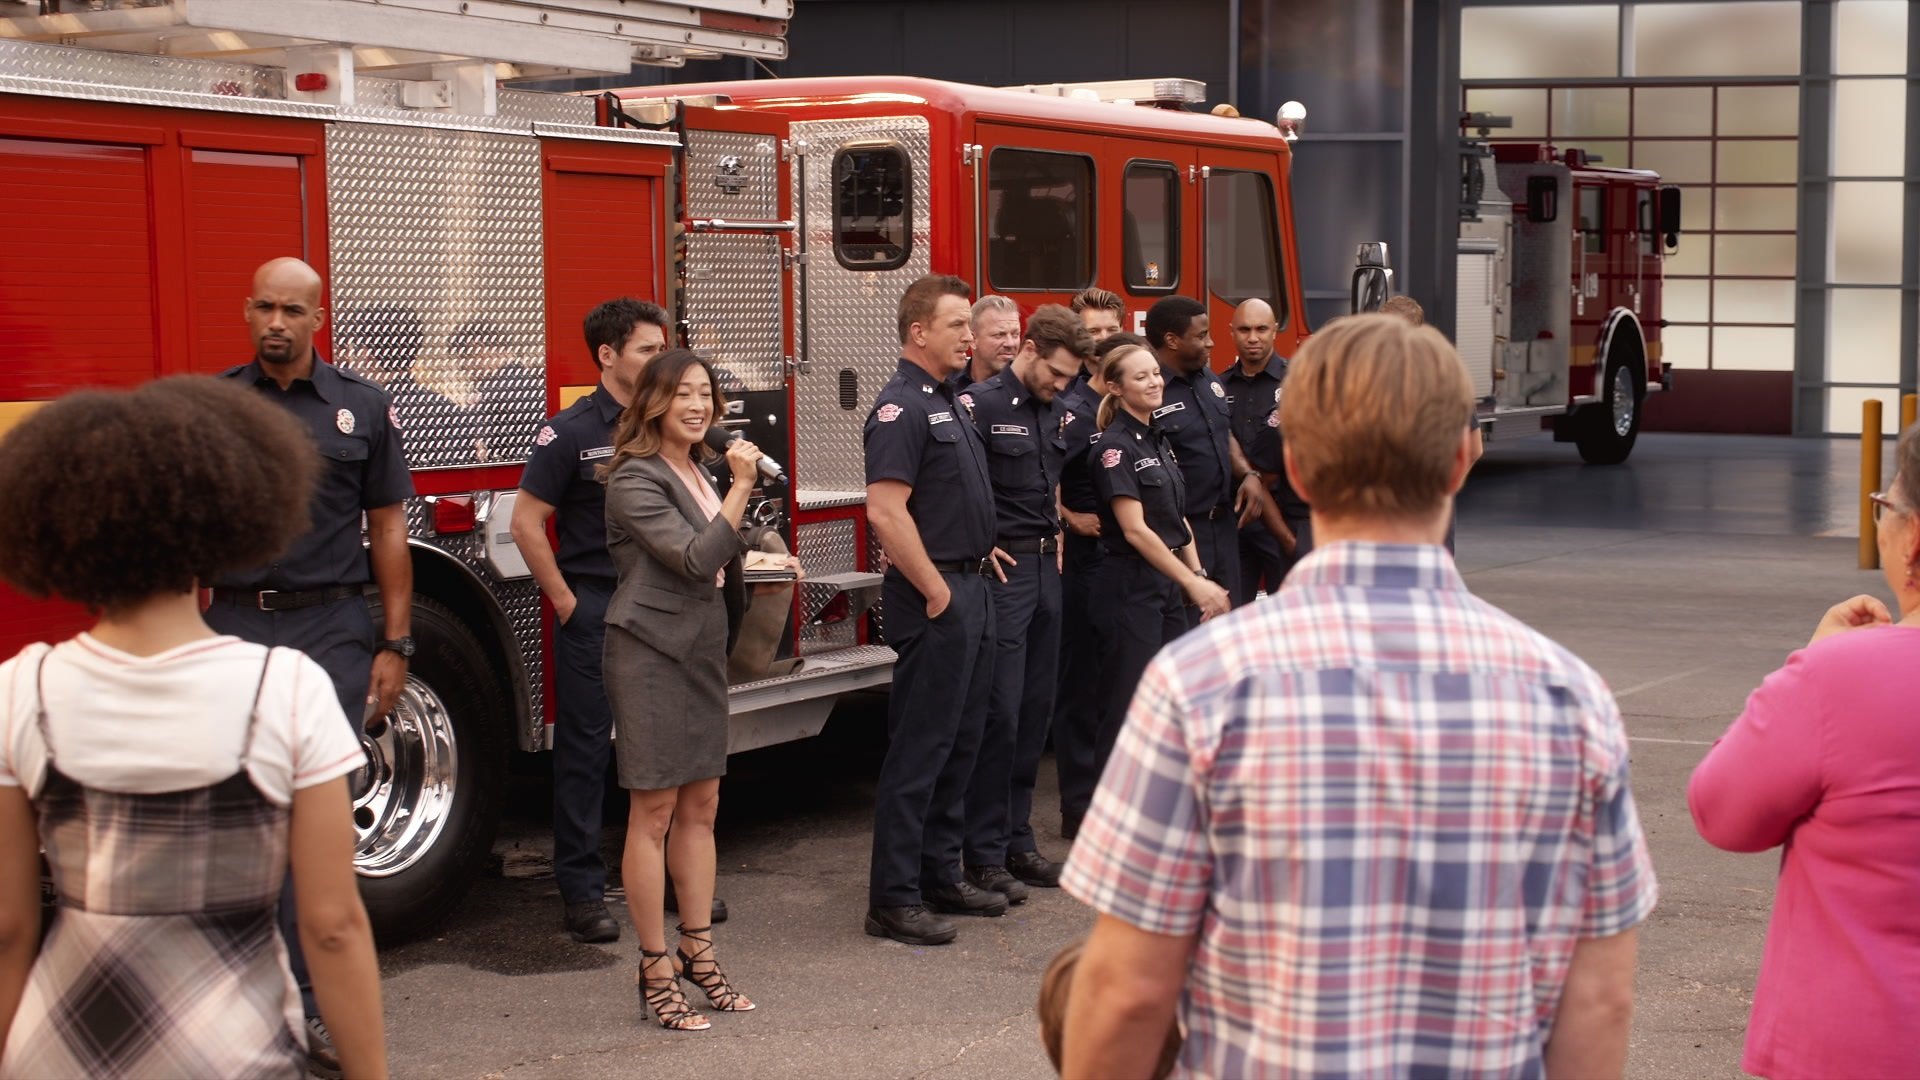 Station 19 Season 5 Episode 3 the firefighters line up for an announcement from newcomer Chemille Chen